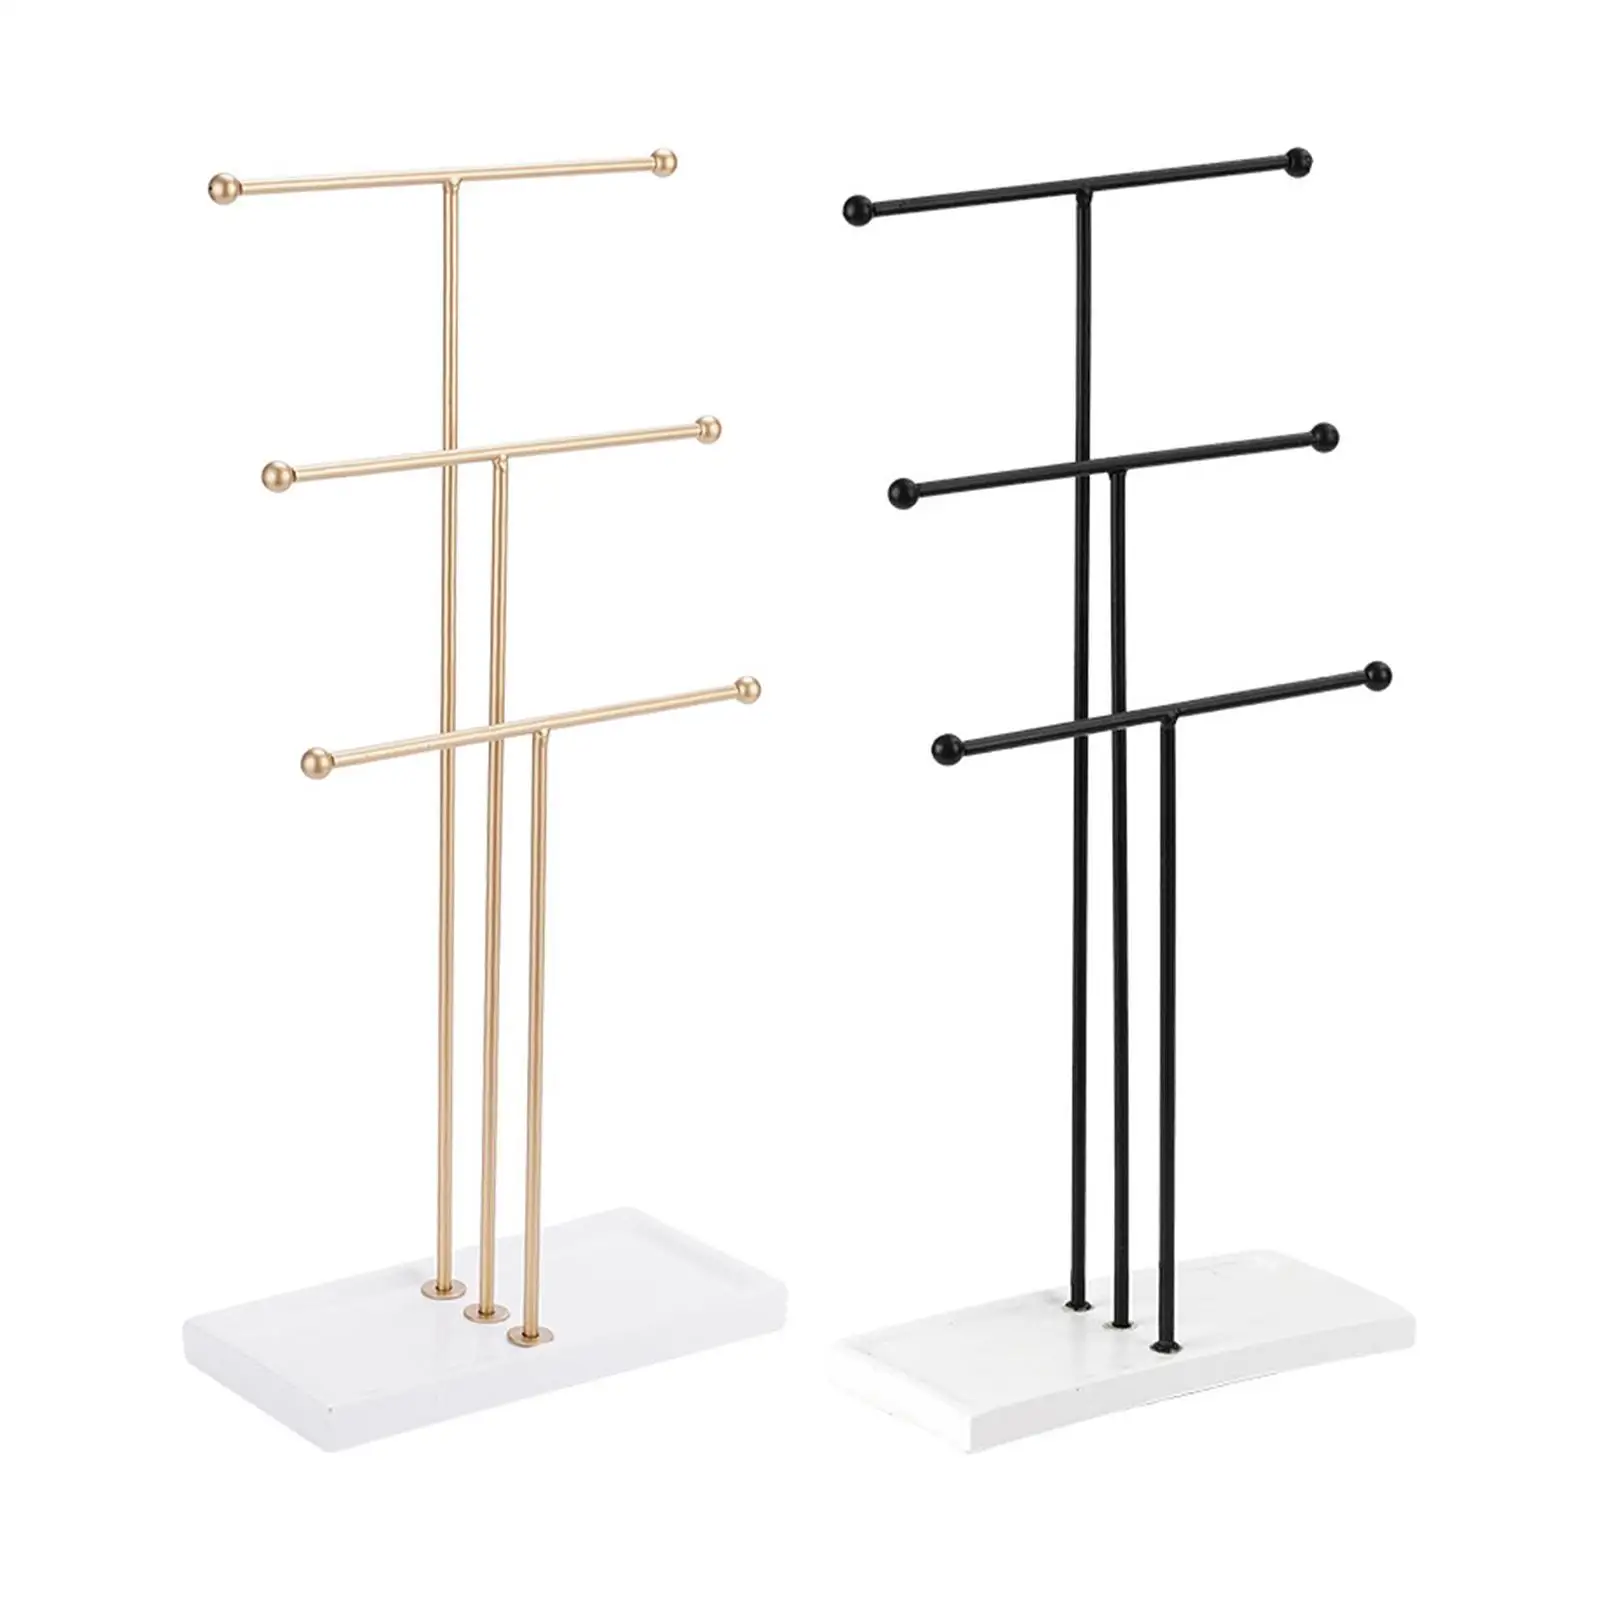 

Tabletop 3 Tiered Bars Necklace Bracelet Jewelry Display Stand, Home and Retail Decors for Earrings, Bracelet, Rings and Watches